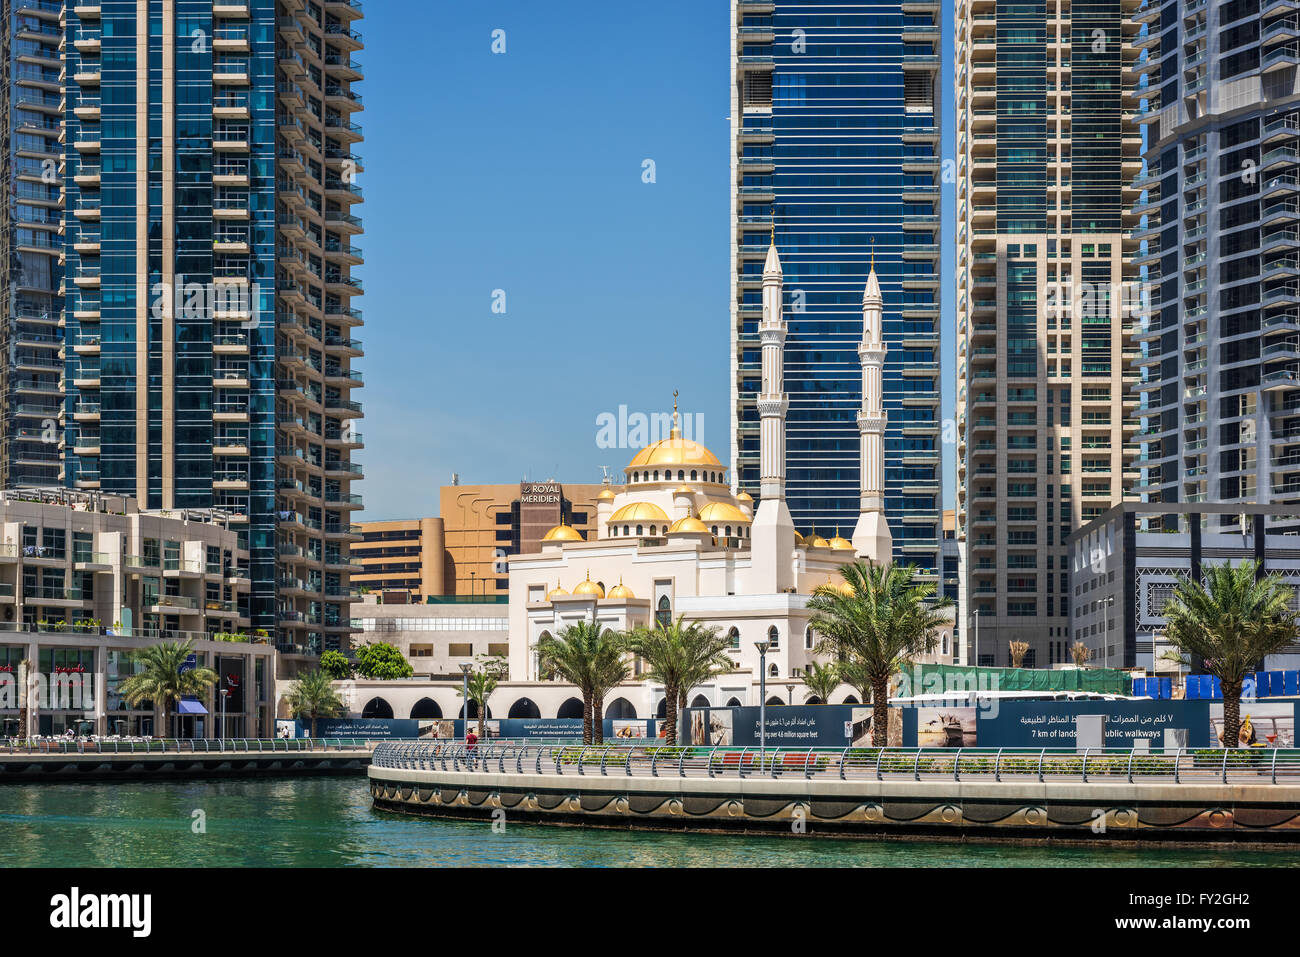 Mosque among modern high rise buildings, towers and hotels at Dubai Marina, United Arab Emirates, Middle East Stock Photo